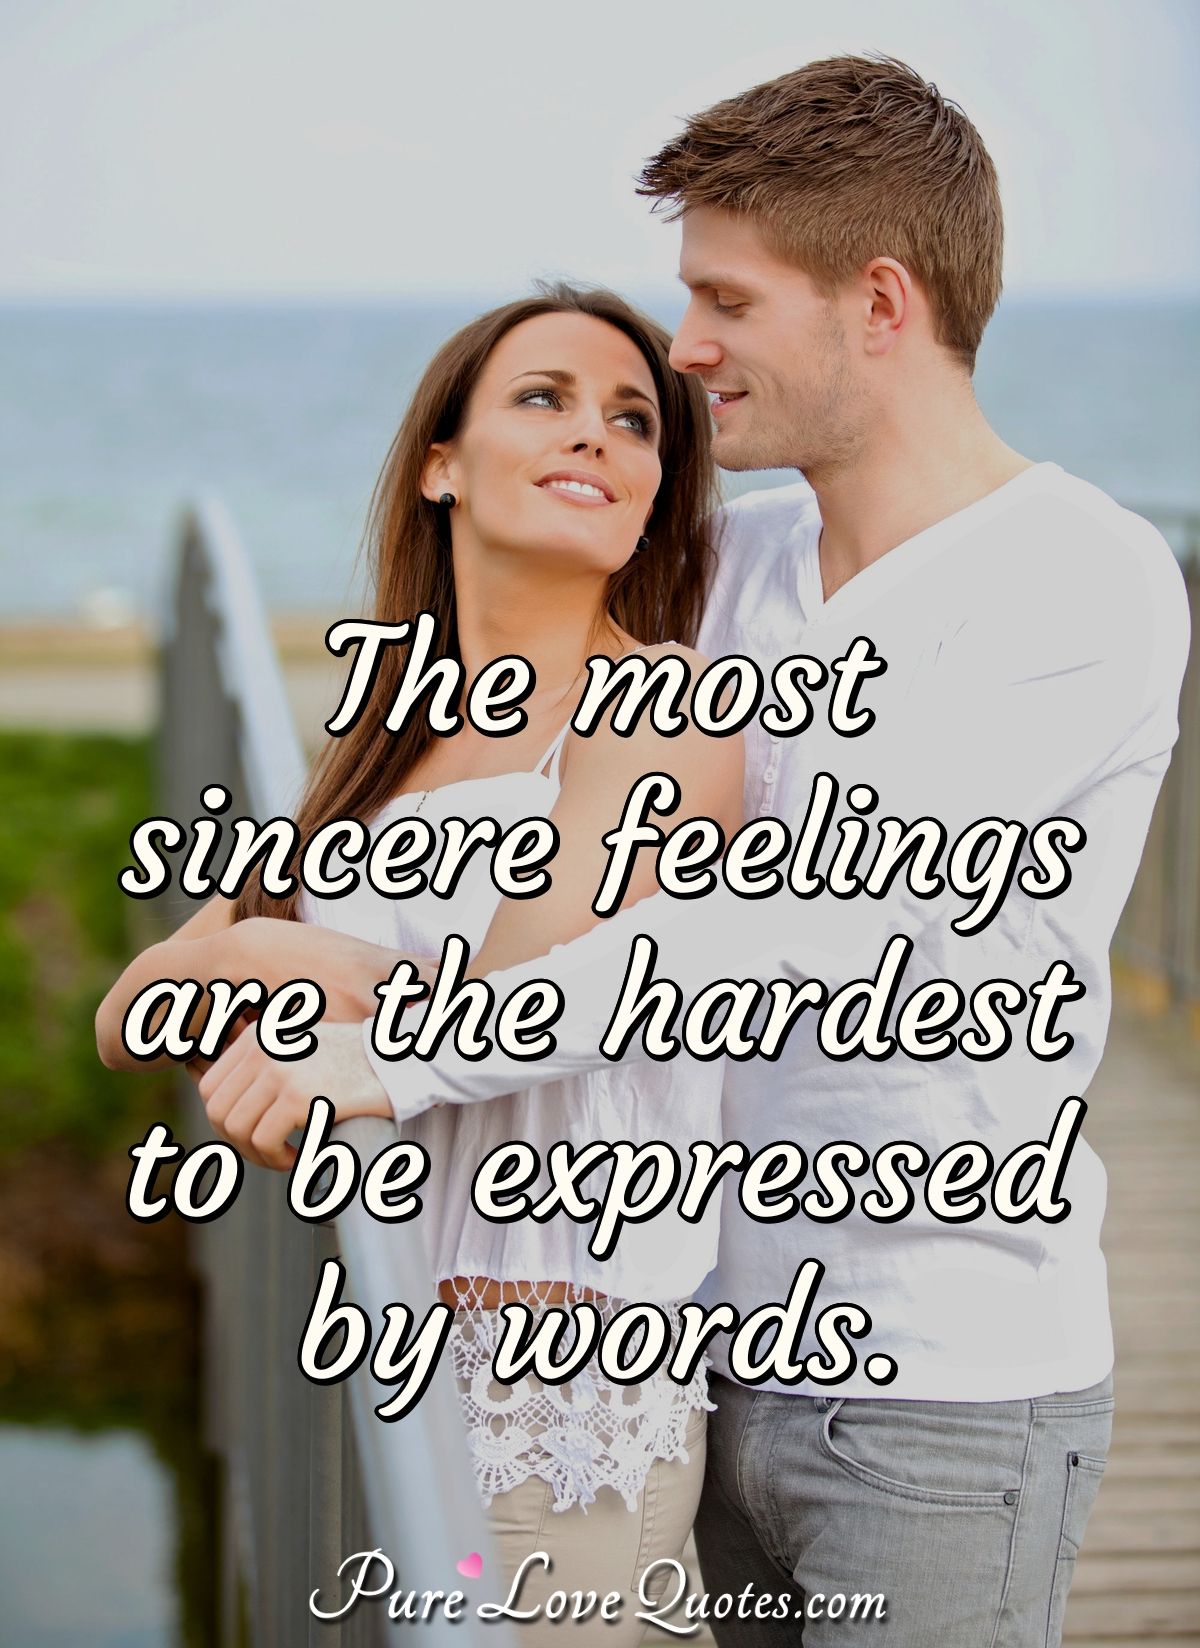 The most sincere feelings are the hardest to be expressed by words. - Anonymous